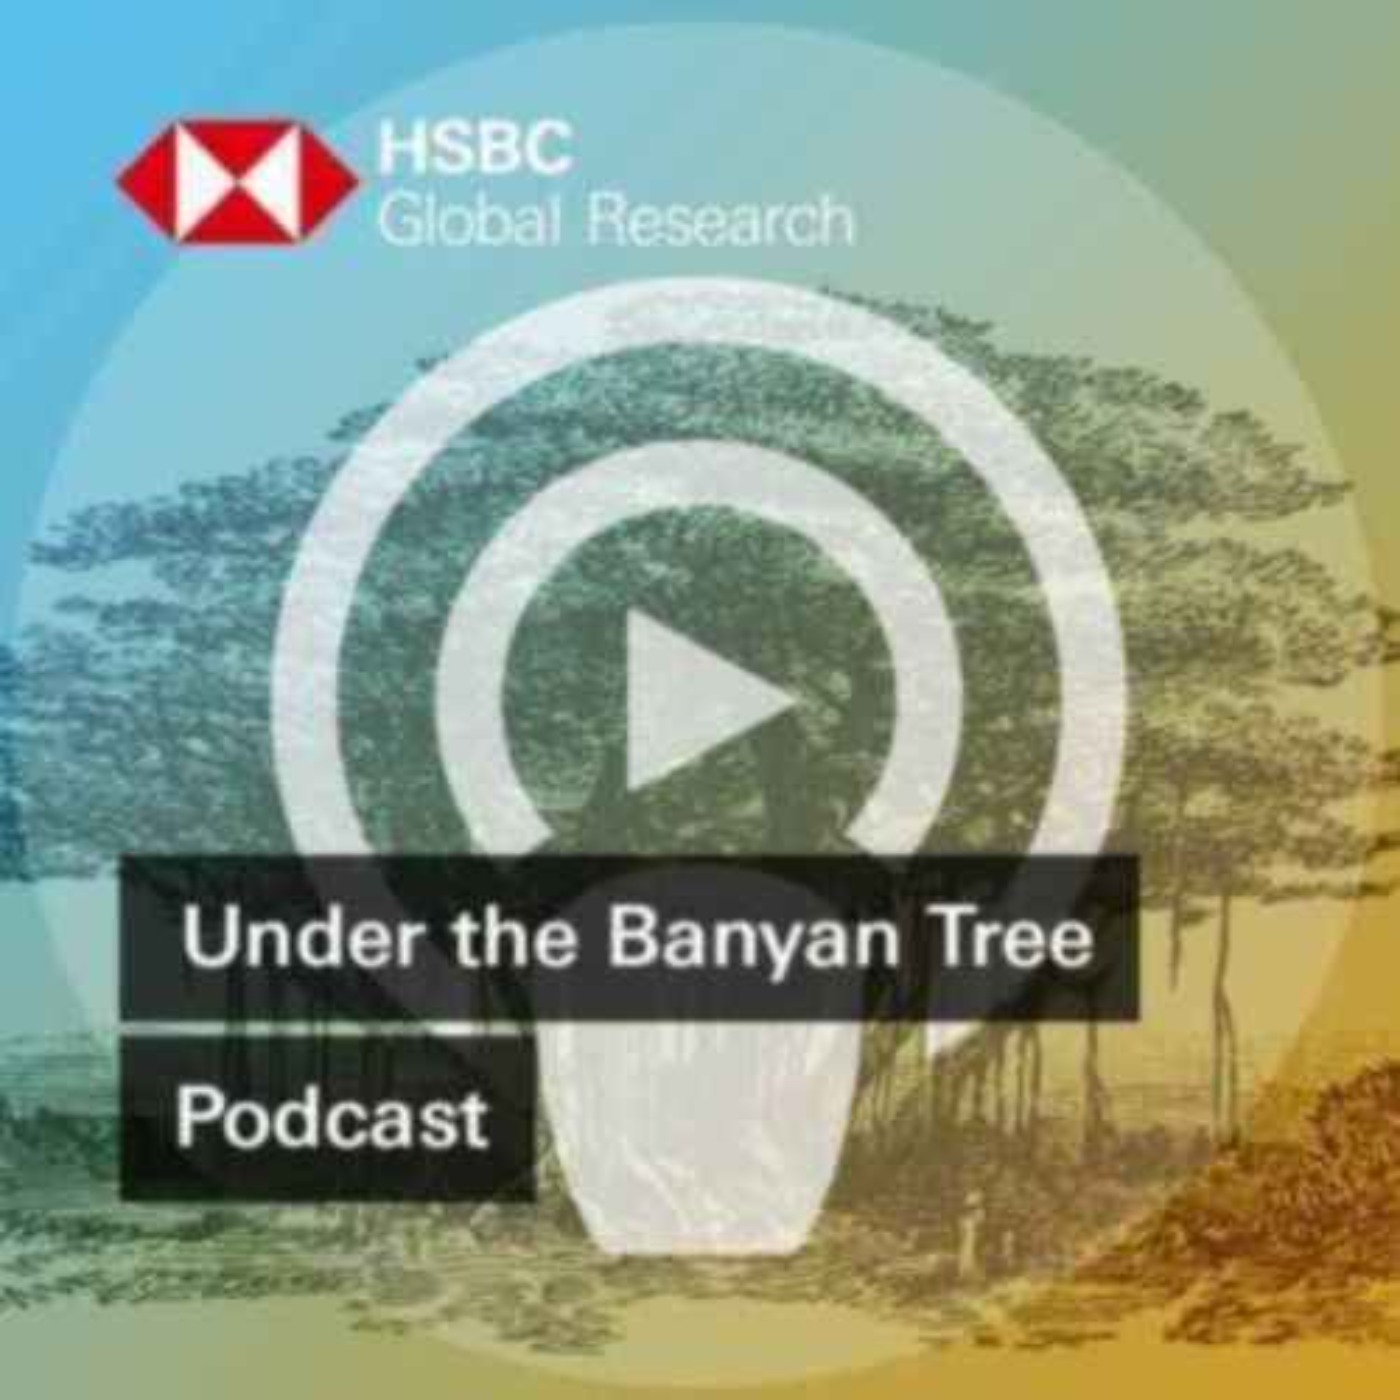 Under the Banyan Tree - What do overseas clients want to know about Asia?